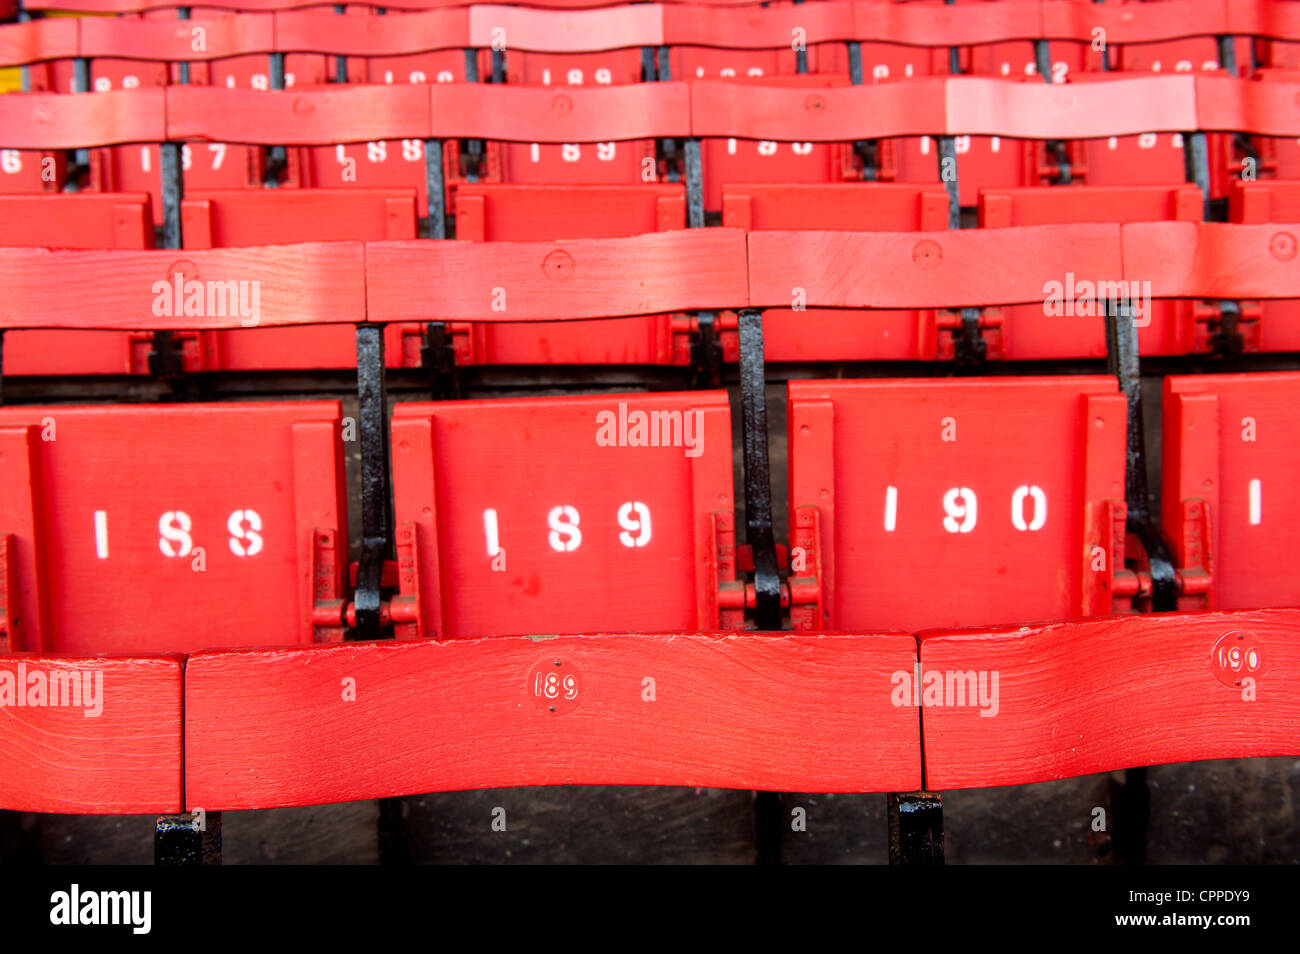 Original wooden seats in the Paddock enclosure at Anfield, home of Liverpool Football Club. Stock Photo